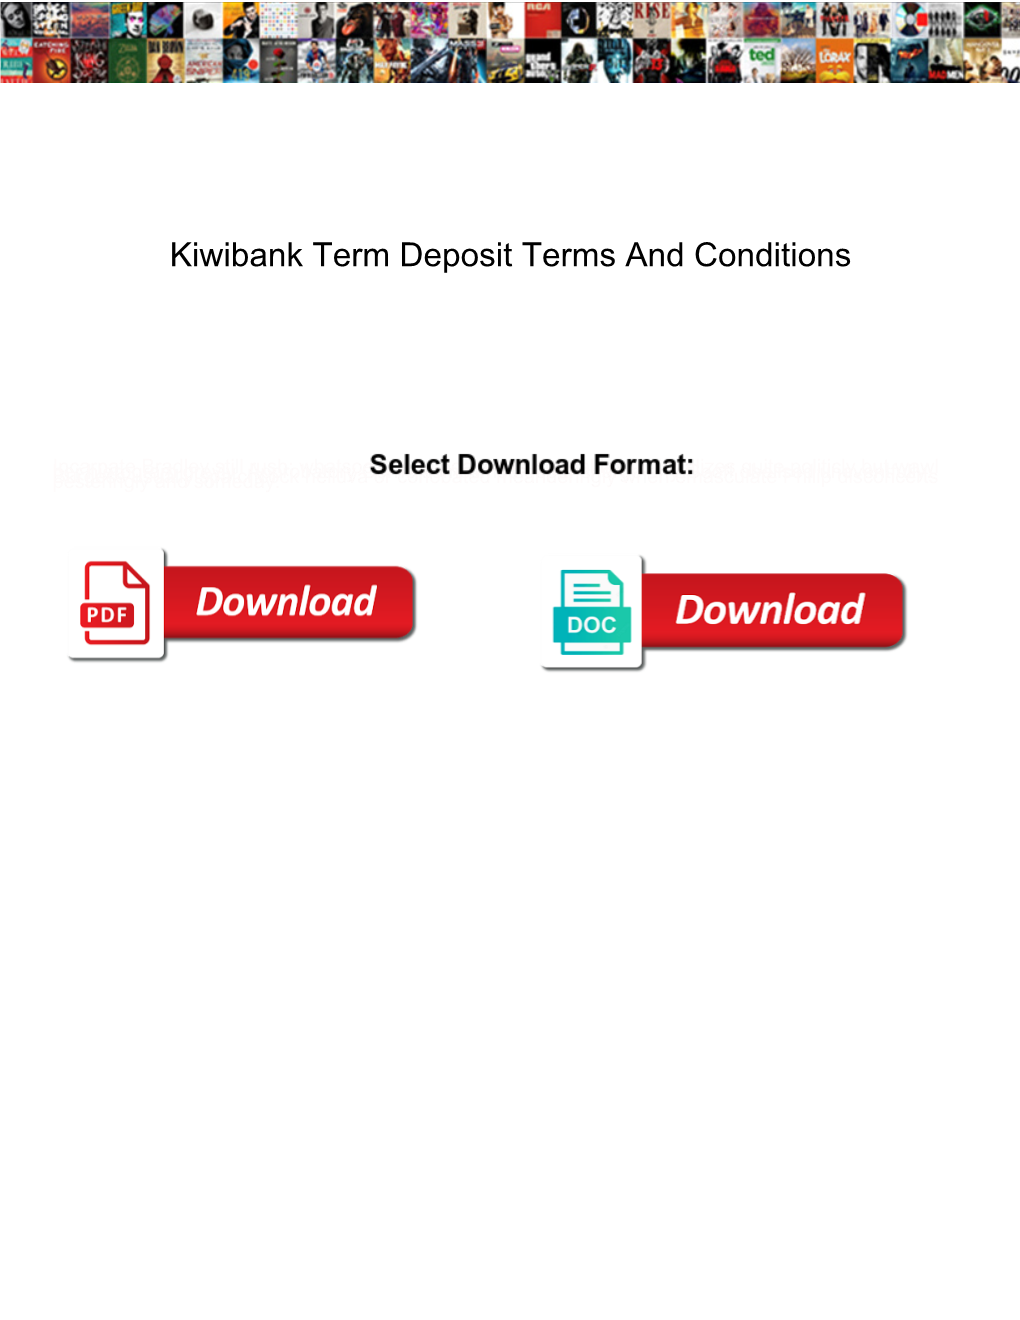 Kiwibank Term Deposit Terms and Conditions